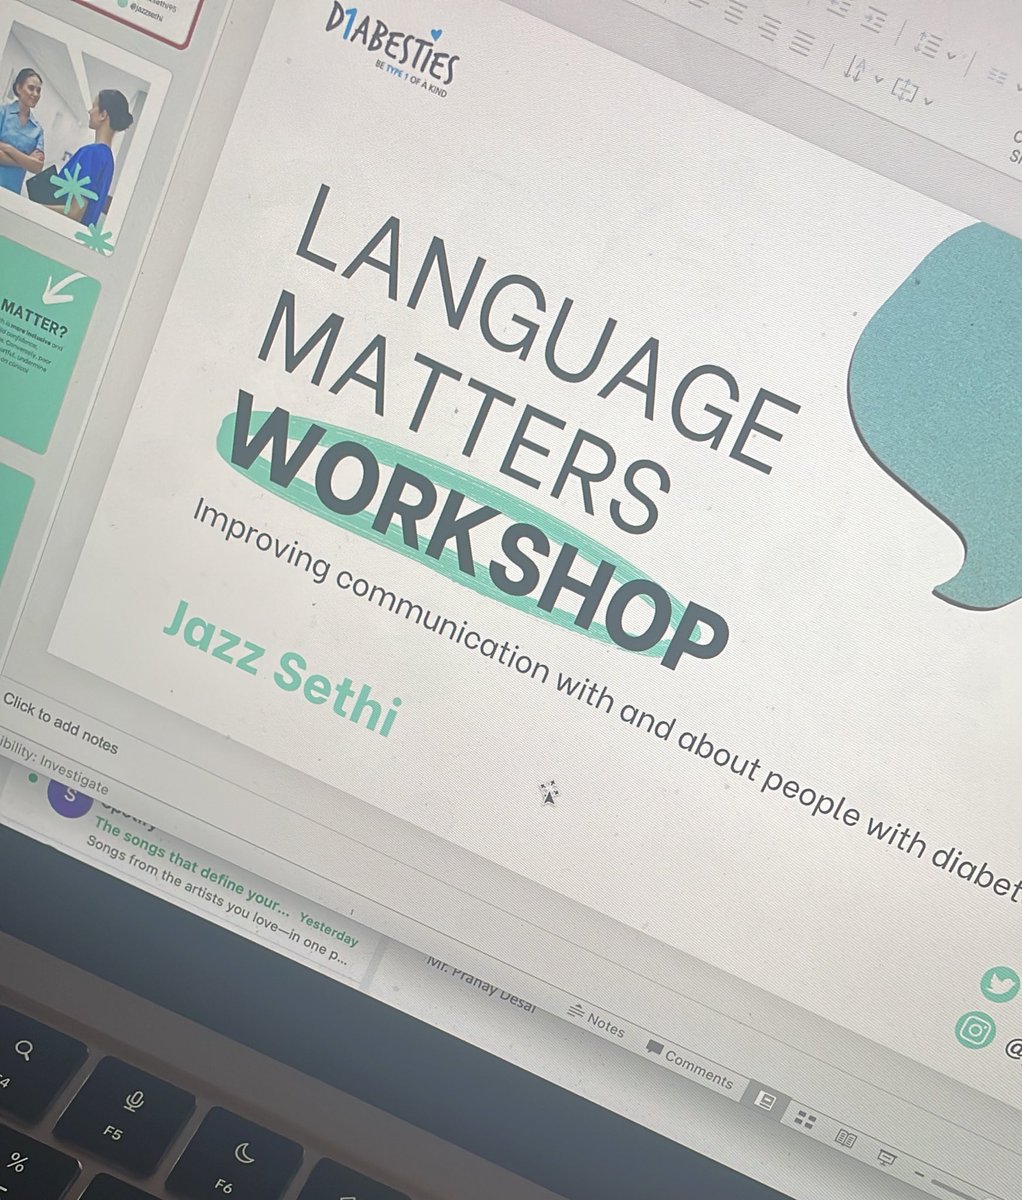 In other news…. 

Conducting a #LanguageMatters workshop in 30 mins! 

Who said Fridays are for chilling? 🥹